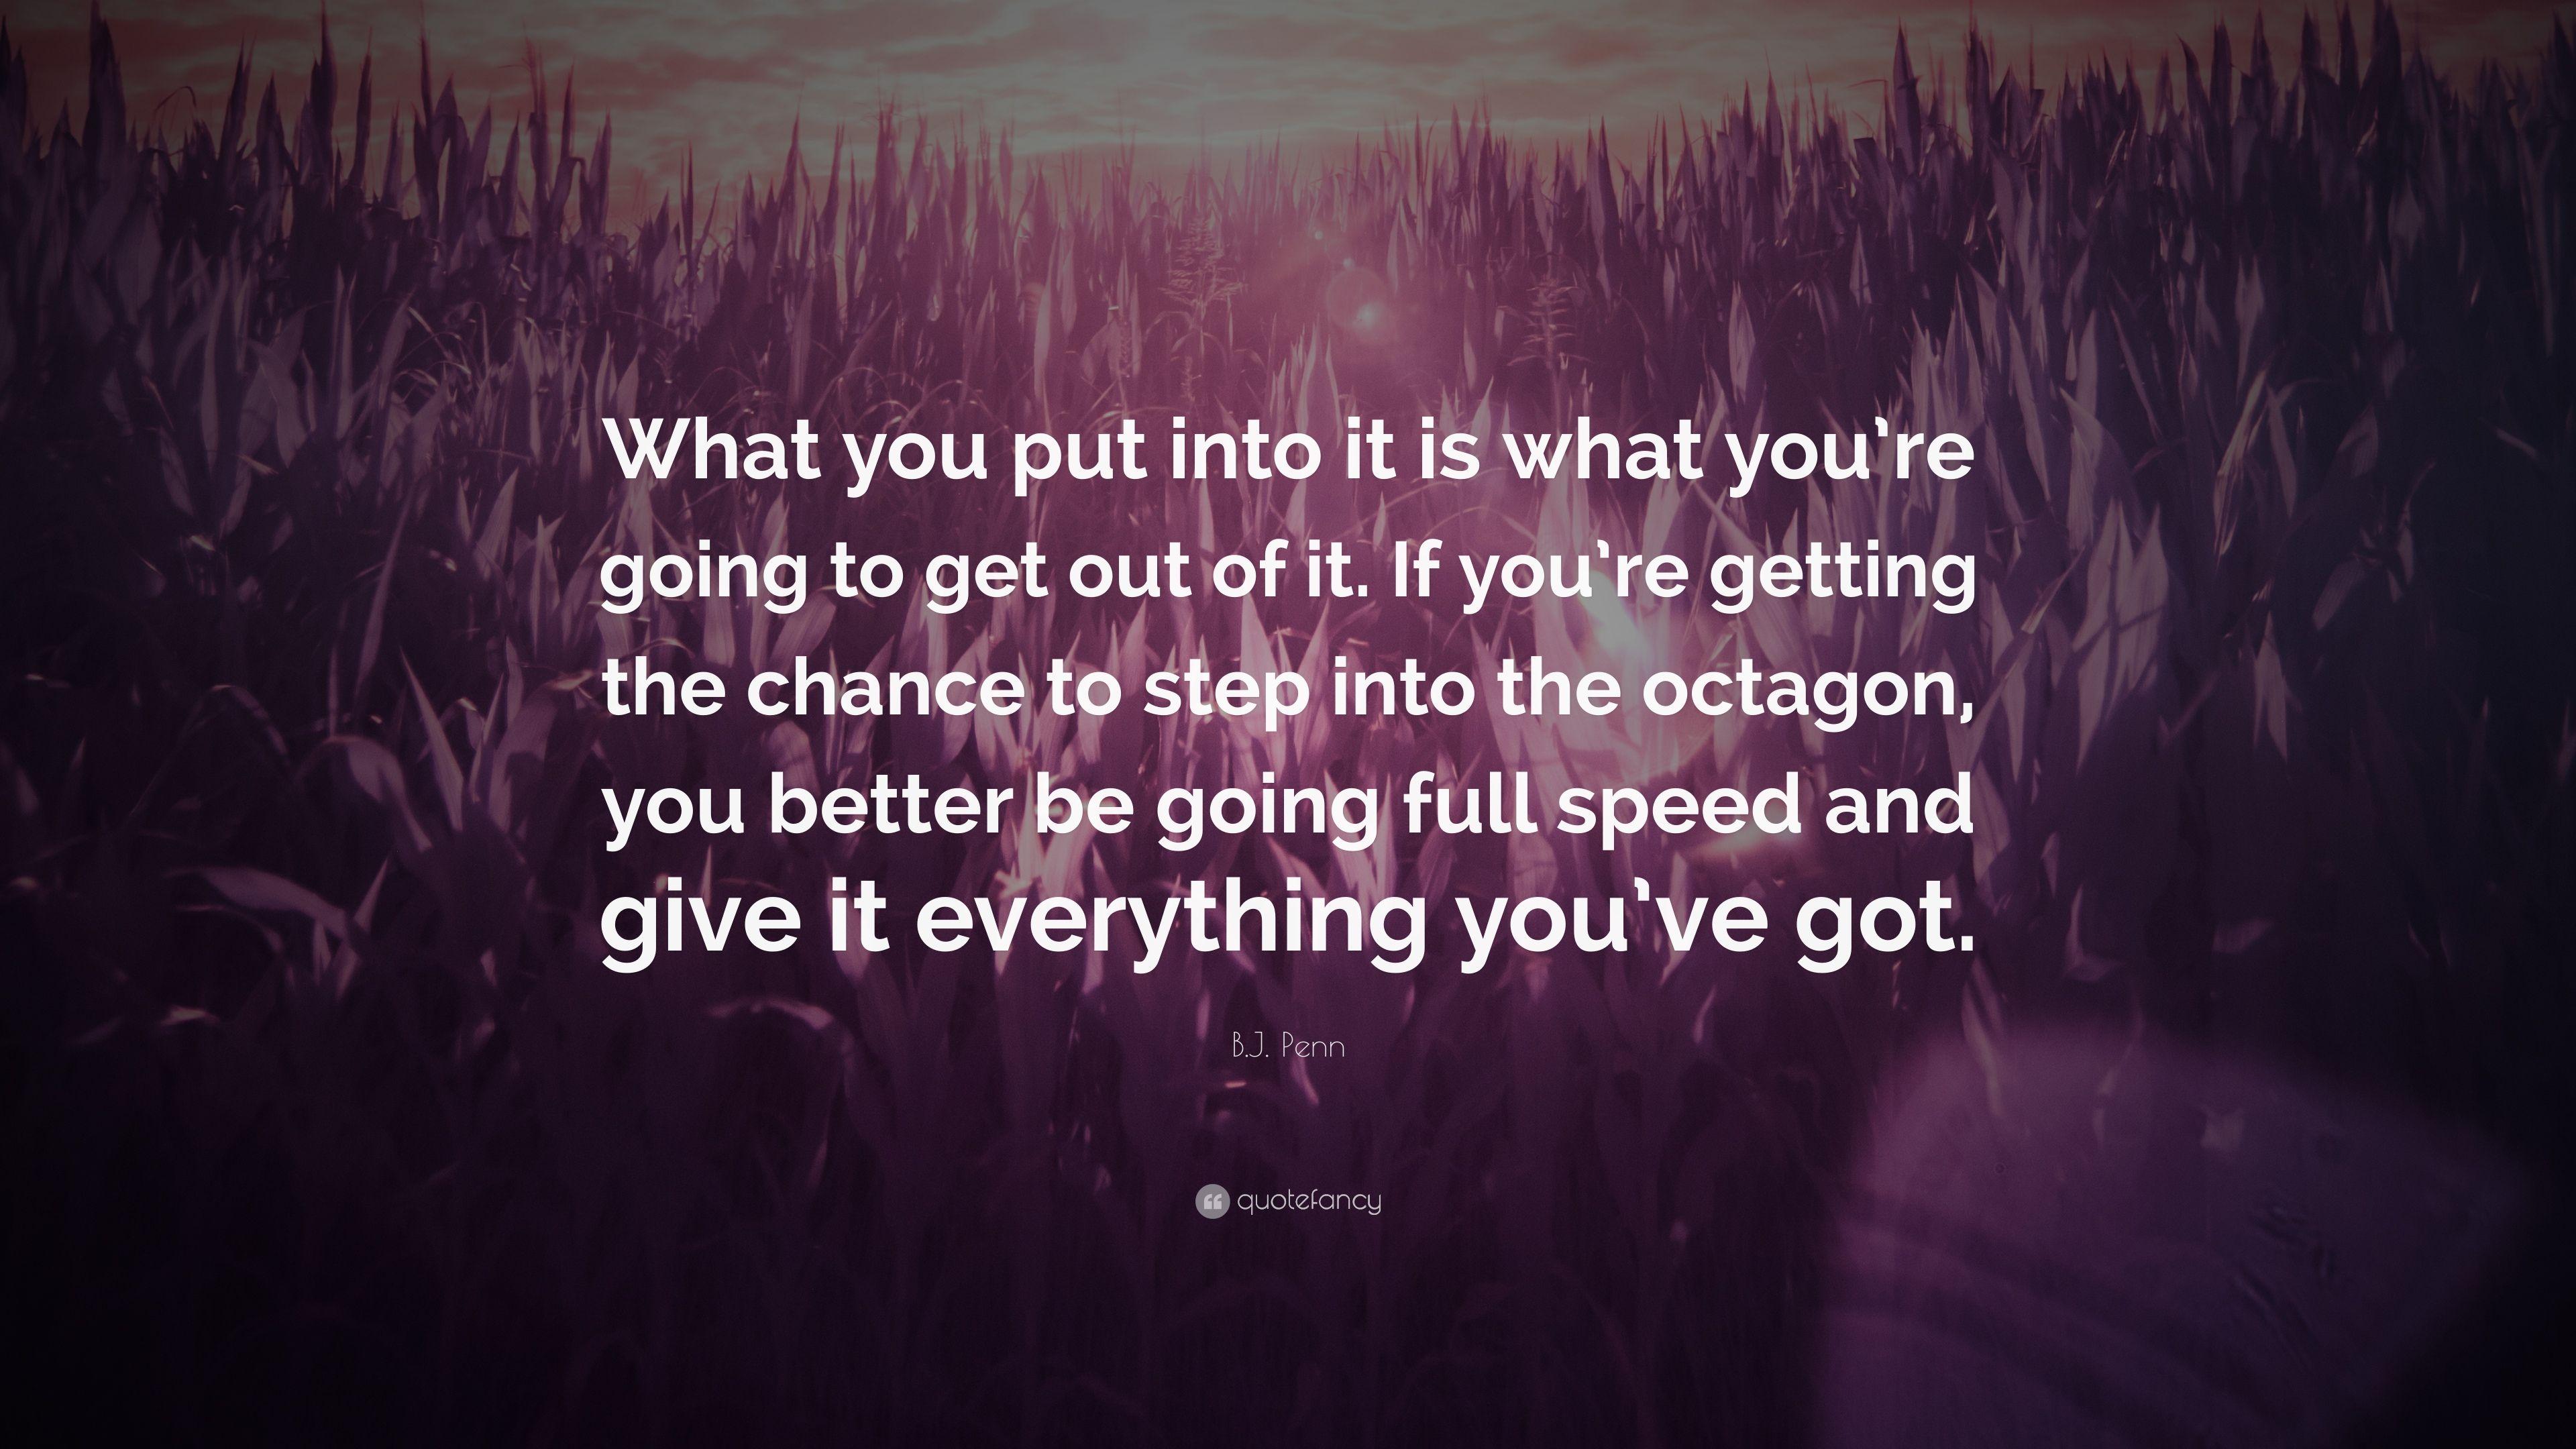 B.J. Penn Quote: “What you put into it is what you're going to get